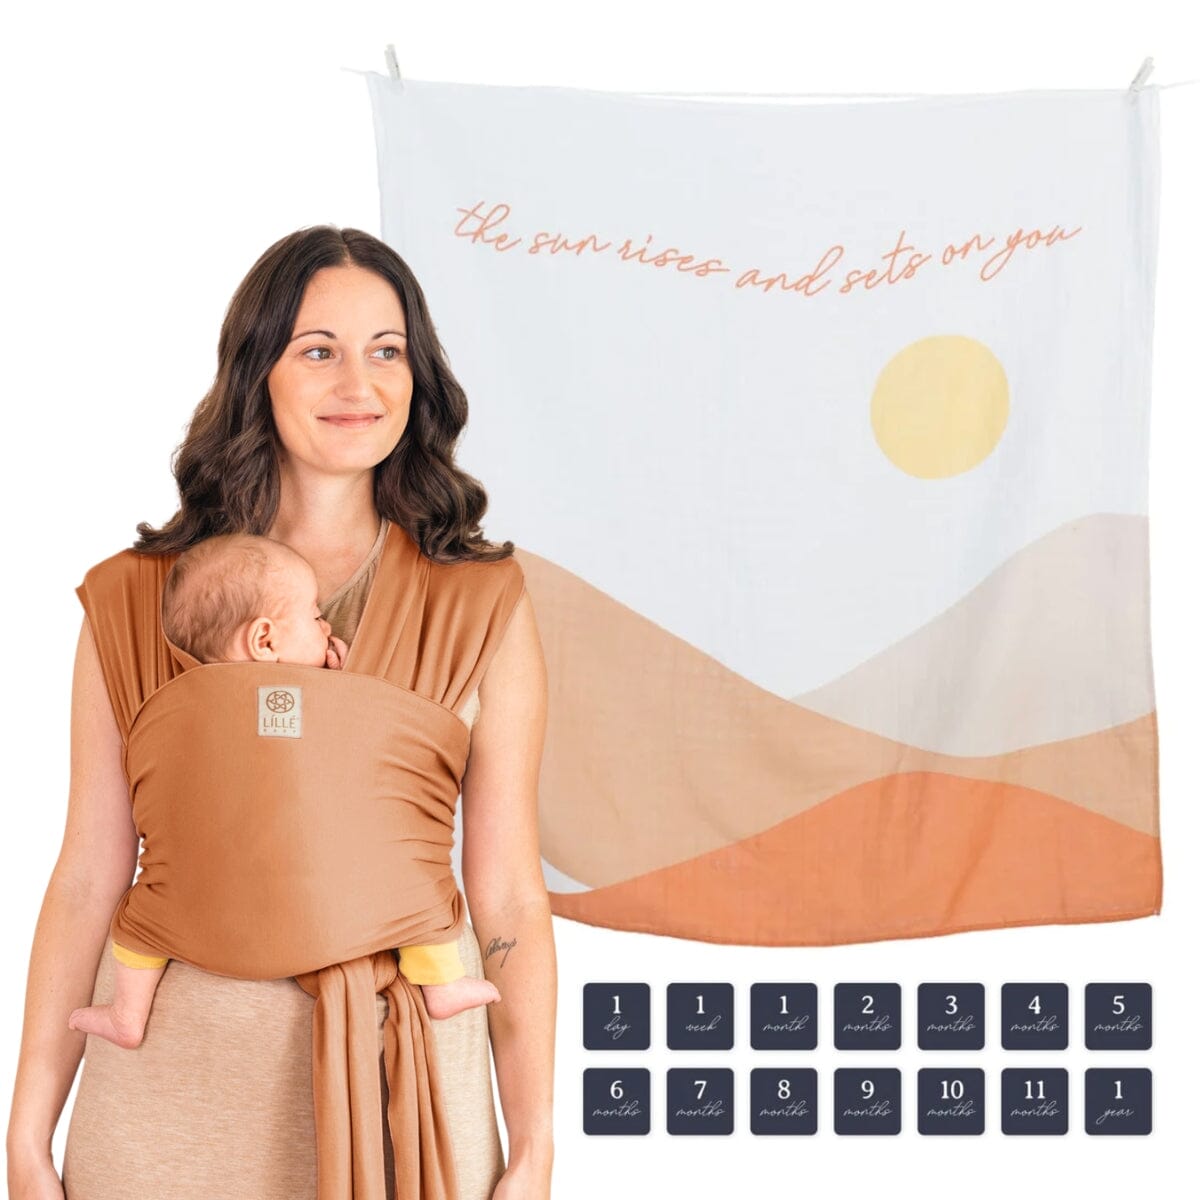 Bundle image of mom wearing baby in lillebaby's dragonfly wrap in butterscotch featuring the lulujo blanket in butterscotch sunrise as well as 14 time period tags